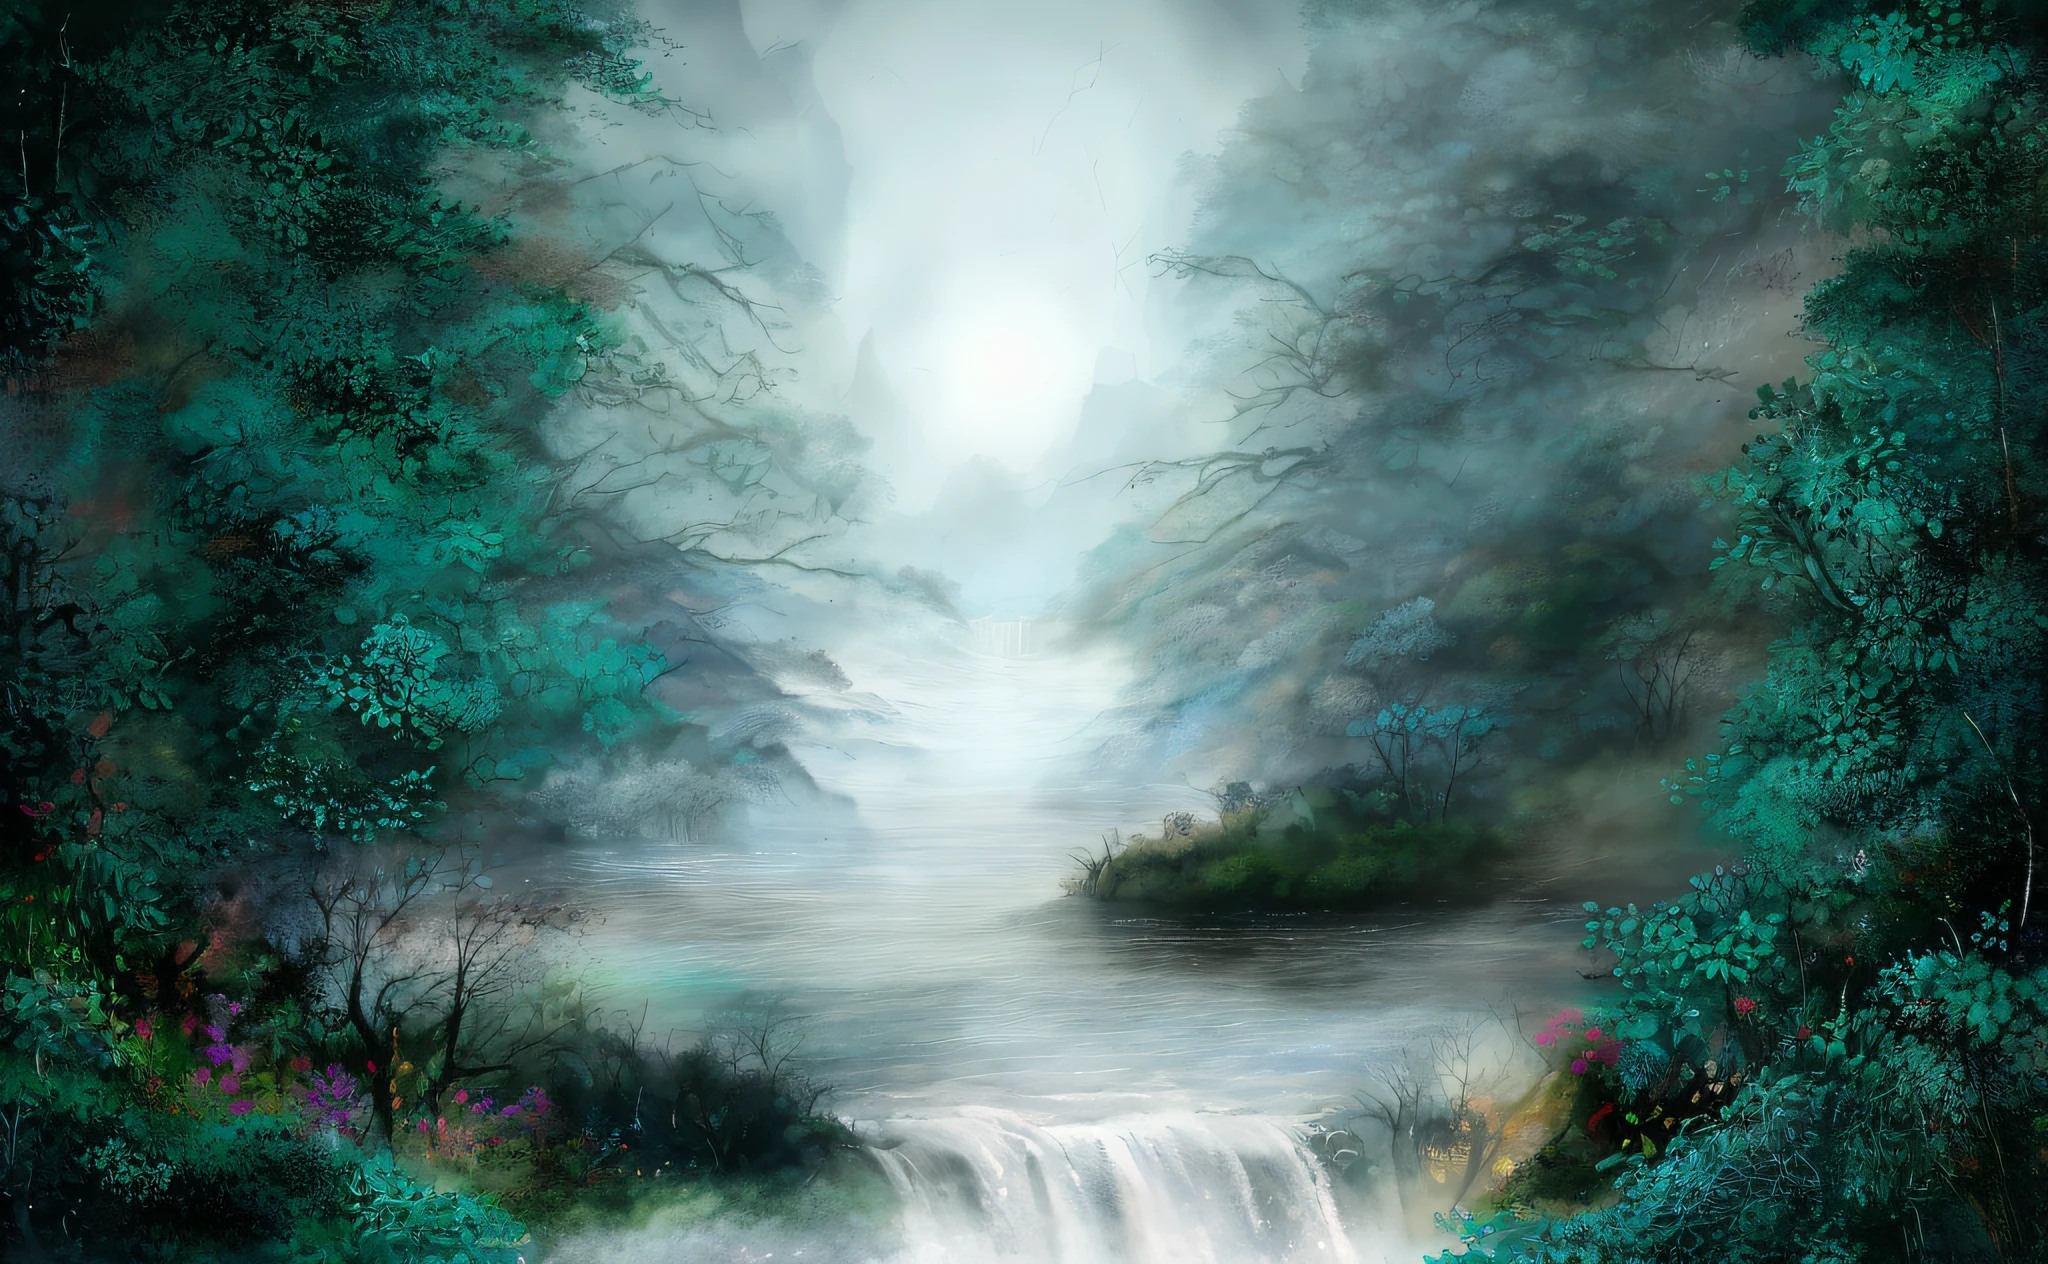 (extremely detailed 8k wallpaper) +, Painting of a waterfall in a forest with full moon, mystical forest pond, atmospheric. digital painting, background art, misty environment, forrest fantasy background, background is hazy, soft digital painting, dreamlike digital painting, fantasy forest landscape, waterfall. fog, fantasy forest background, misty background, forest and waterfall, in a forest. digital art